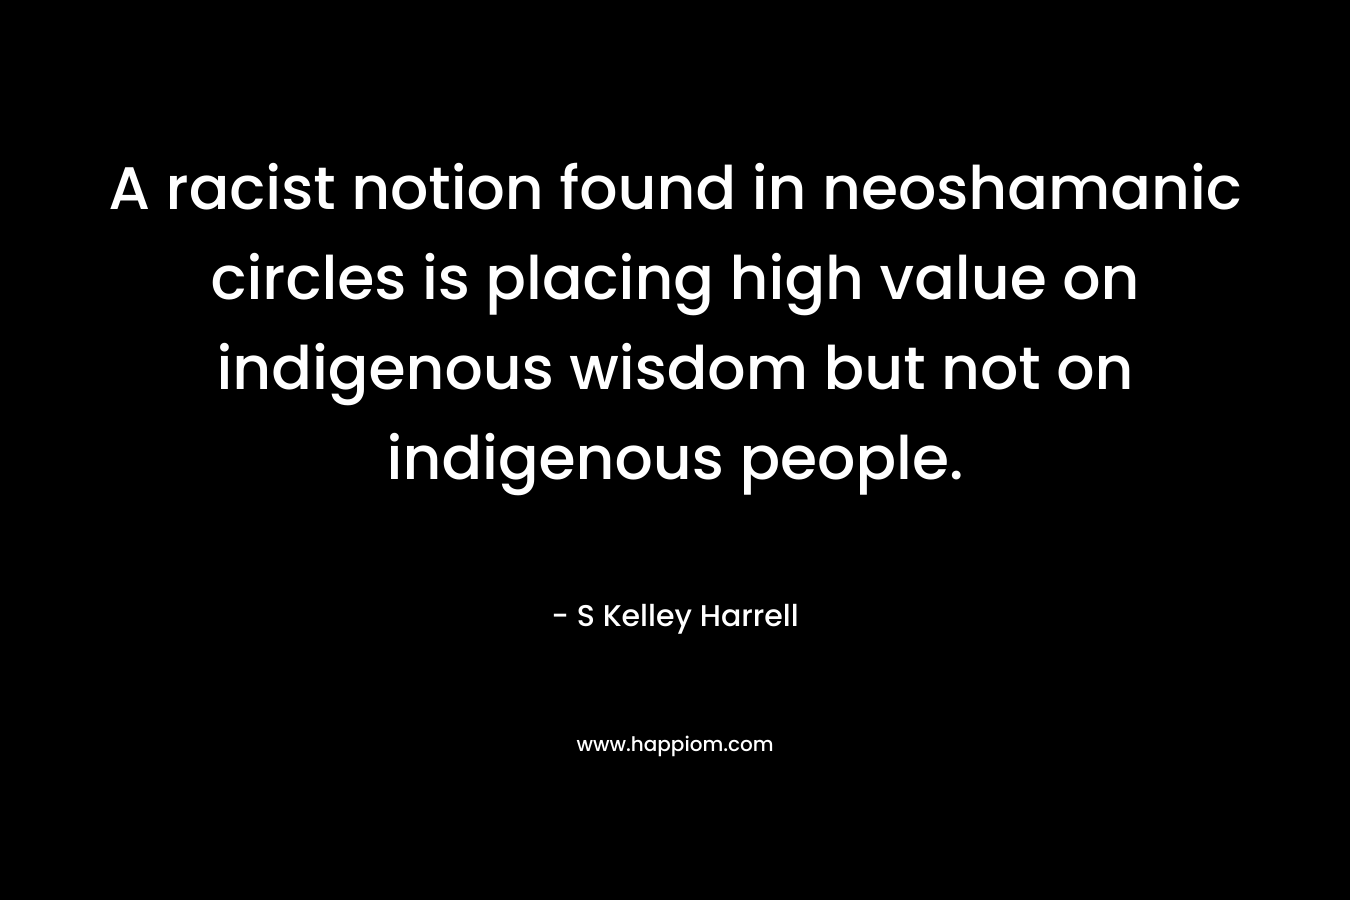 A racist notion found in neoshamanic circles is placing high value on indigenous wisdom but not on indigenous people. – S Kelley Harrell